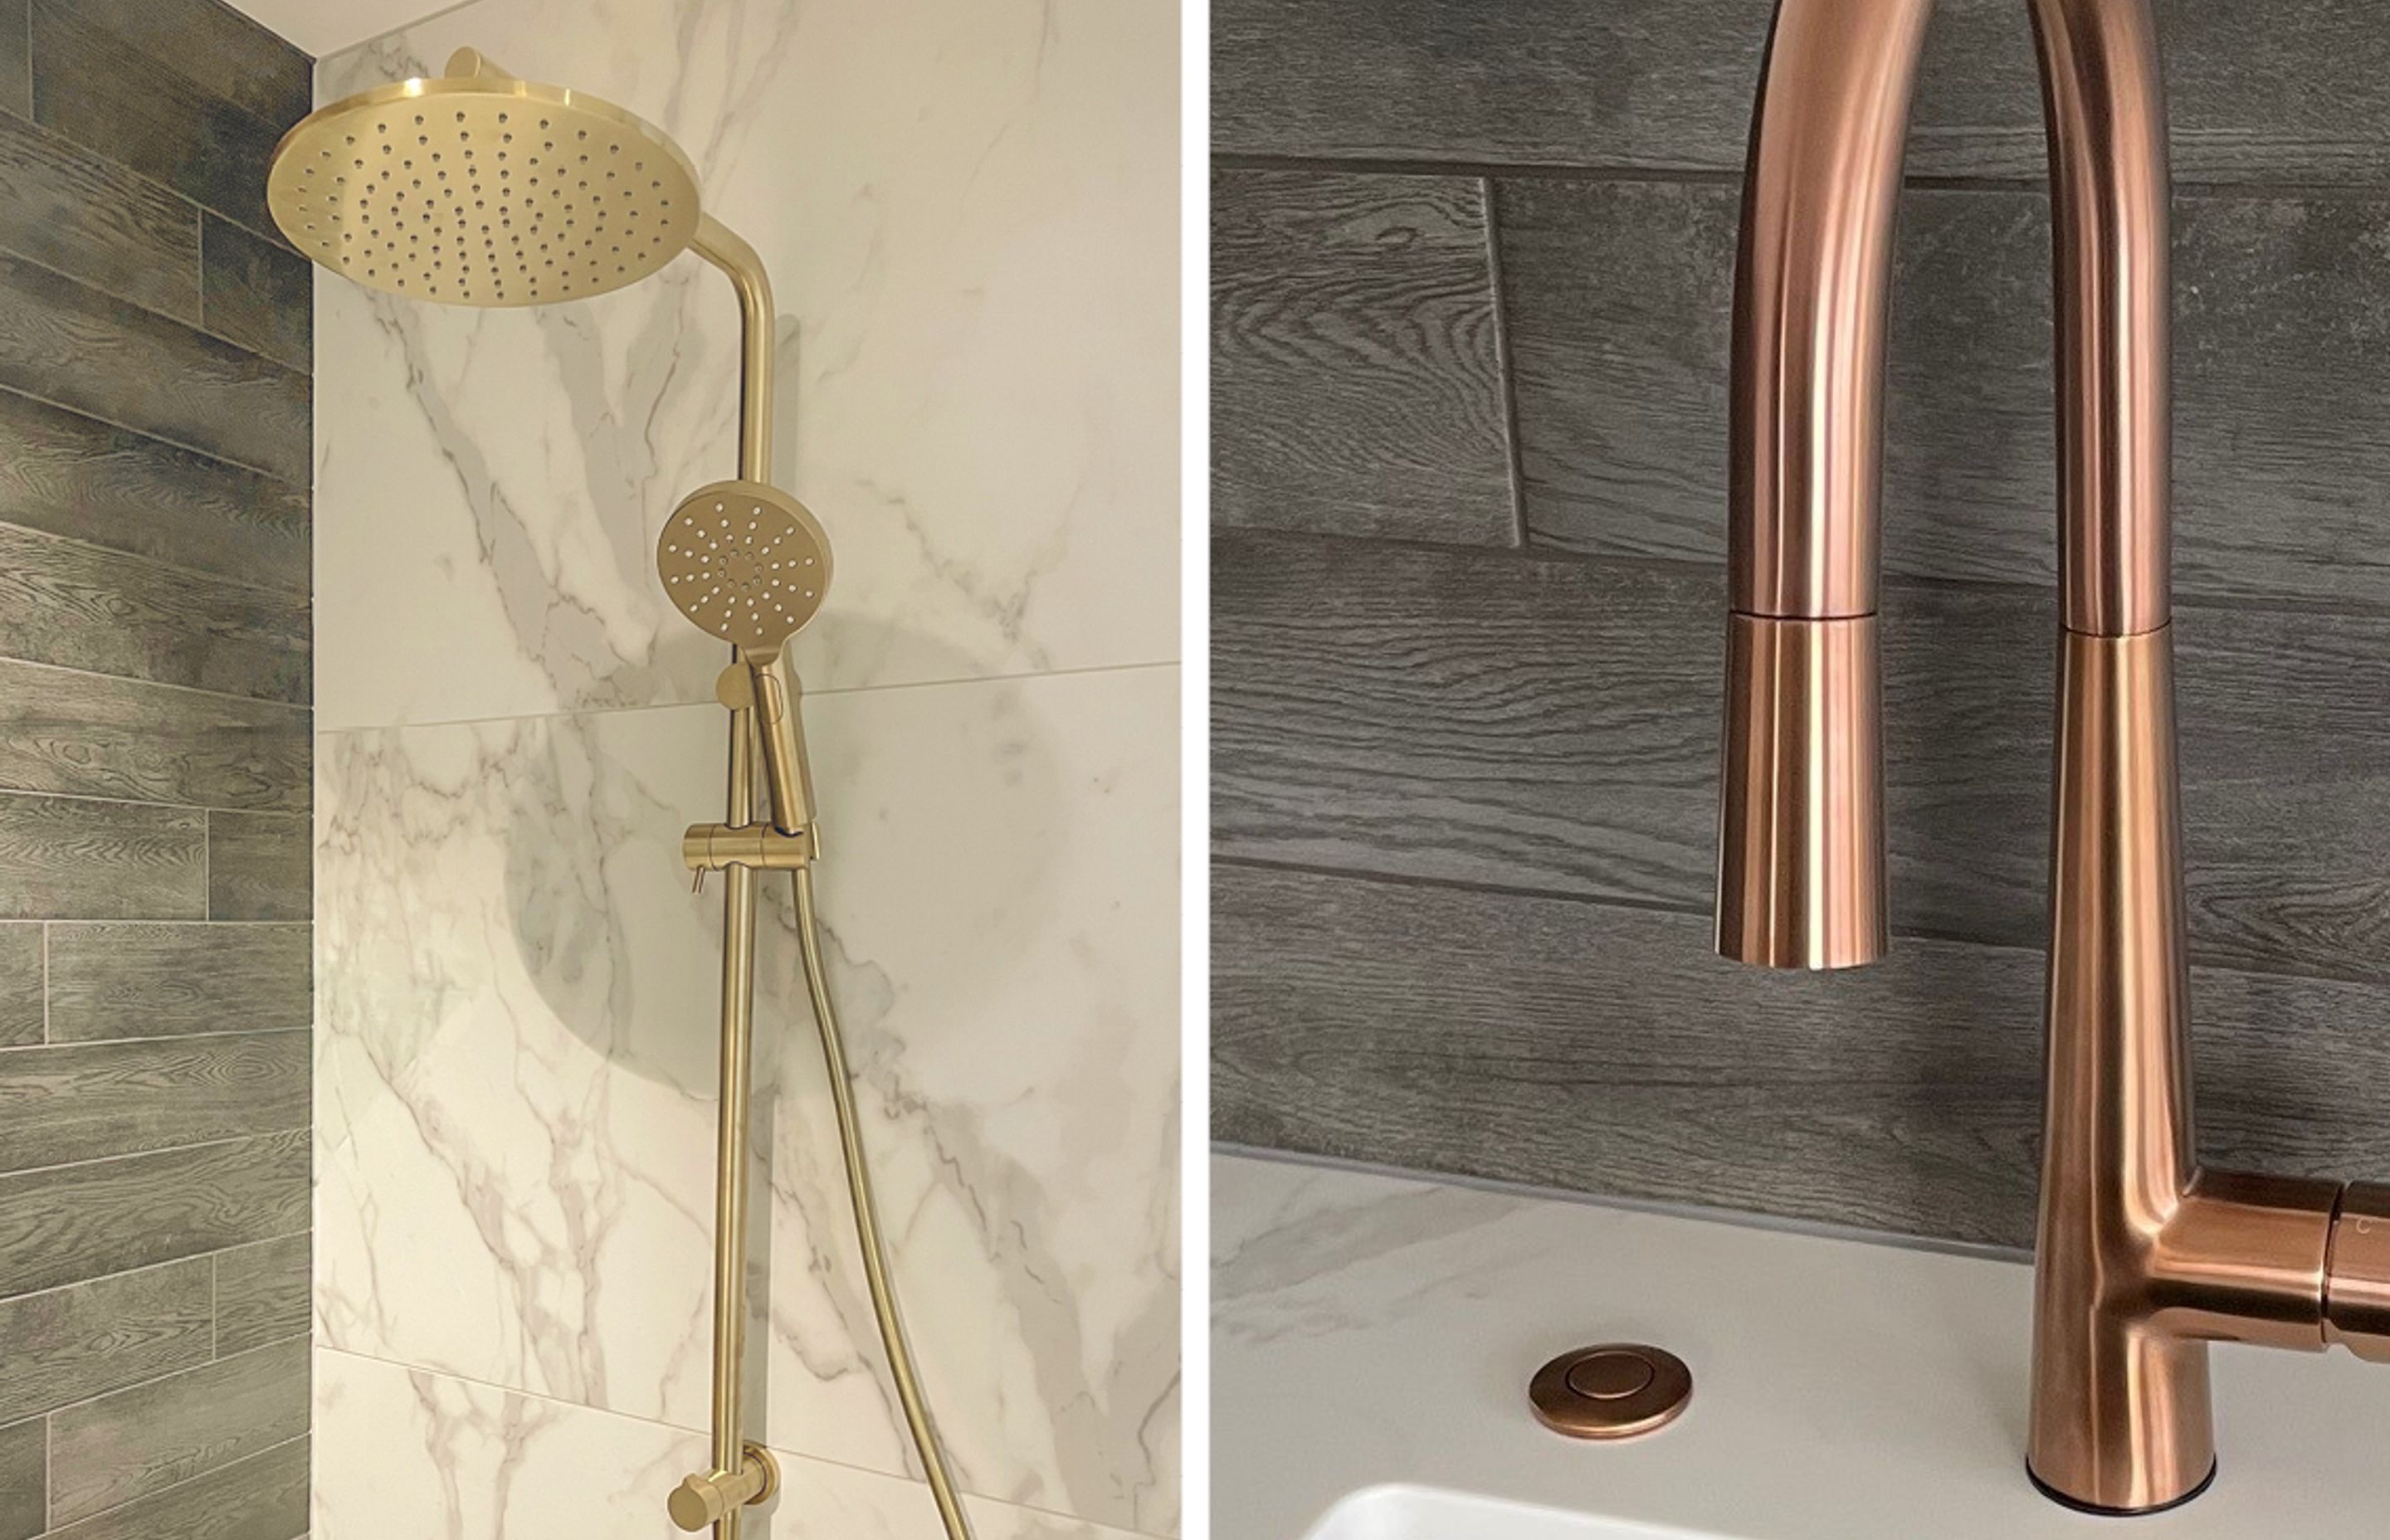 The Code Lamone Round Shower Column with 250mm rain head (see here in brass finish) creates a contemporary look in the bathroom, while, in the kitchen, the brushed copper airswitch matches perfectly with the kitchen mixer.